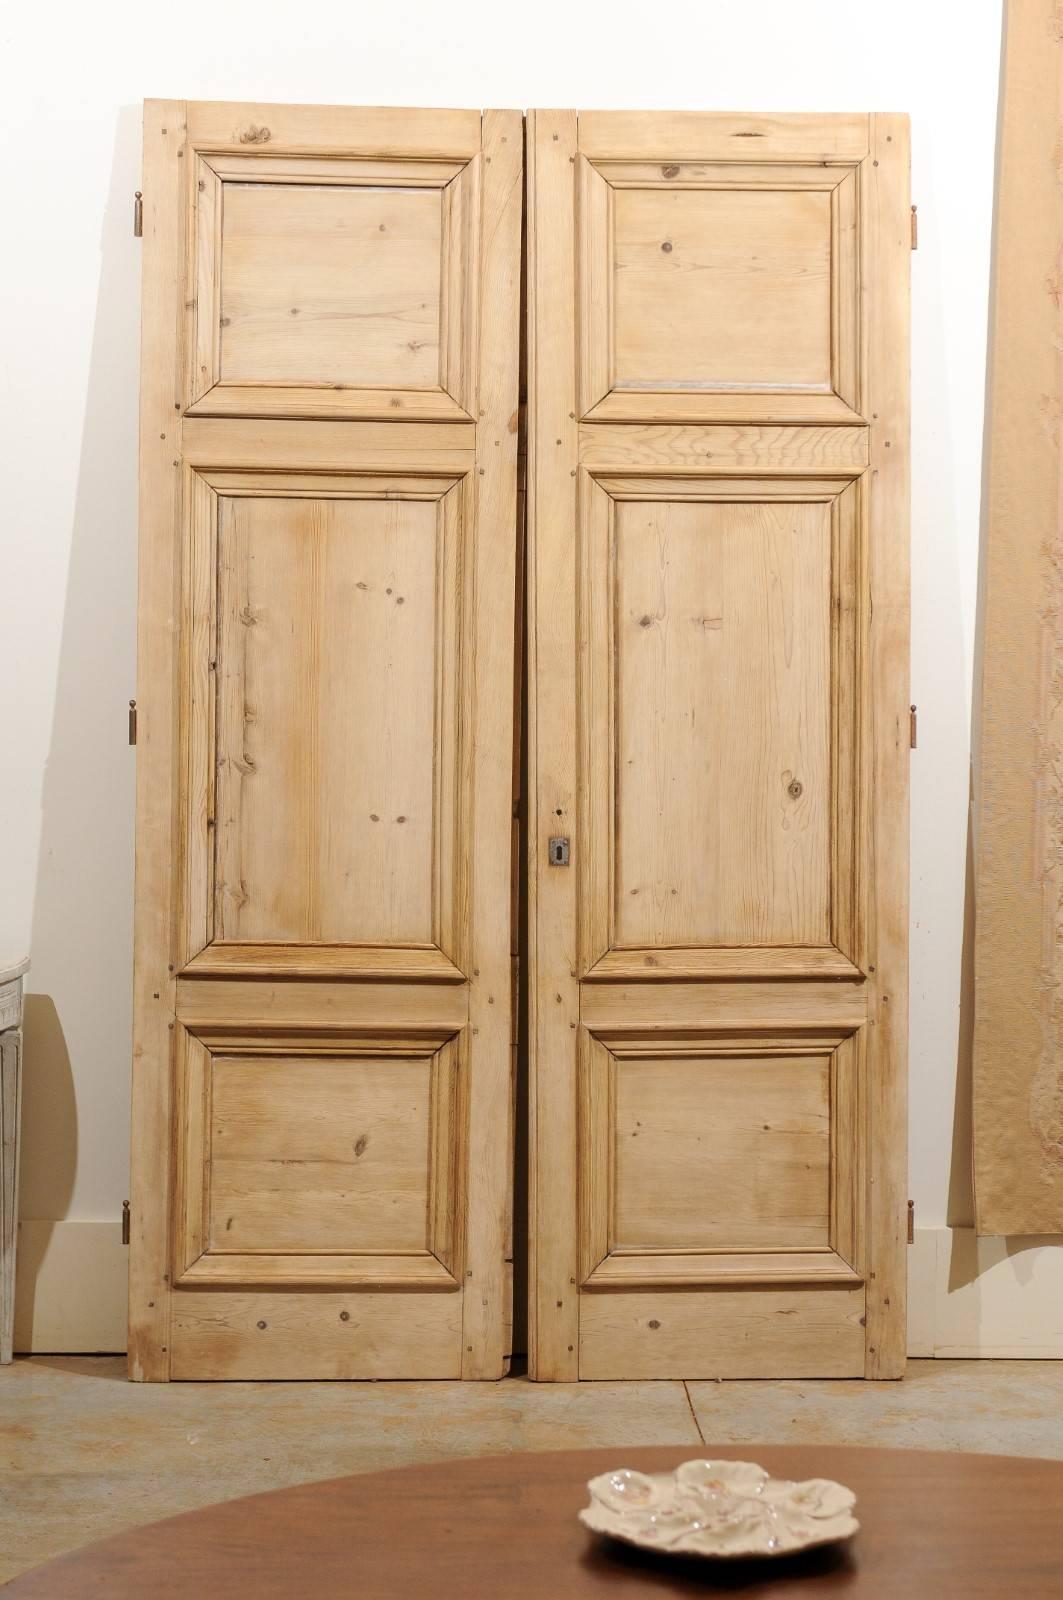 A pair of French Haussmannian wooden doors from the 19th century. This pair of French doors features the typical Haussmannian structure, made of three panels with raised molding 'à grand cadre'. The central molded panel, larger in size, is